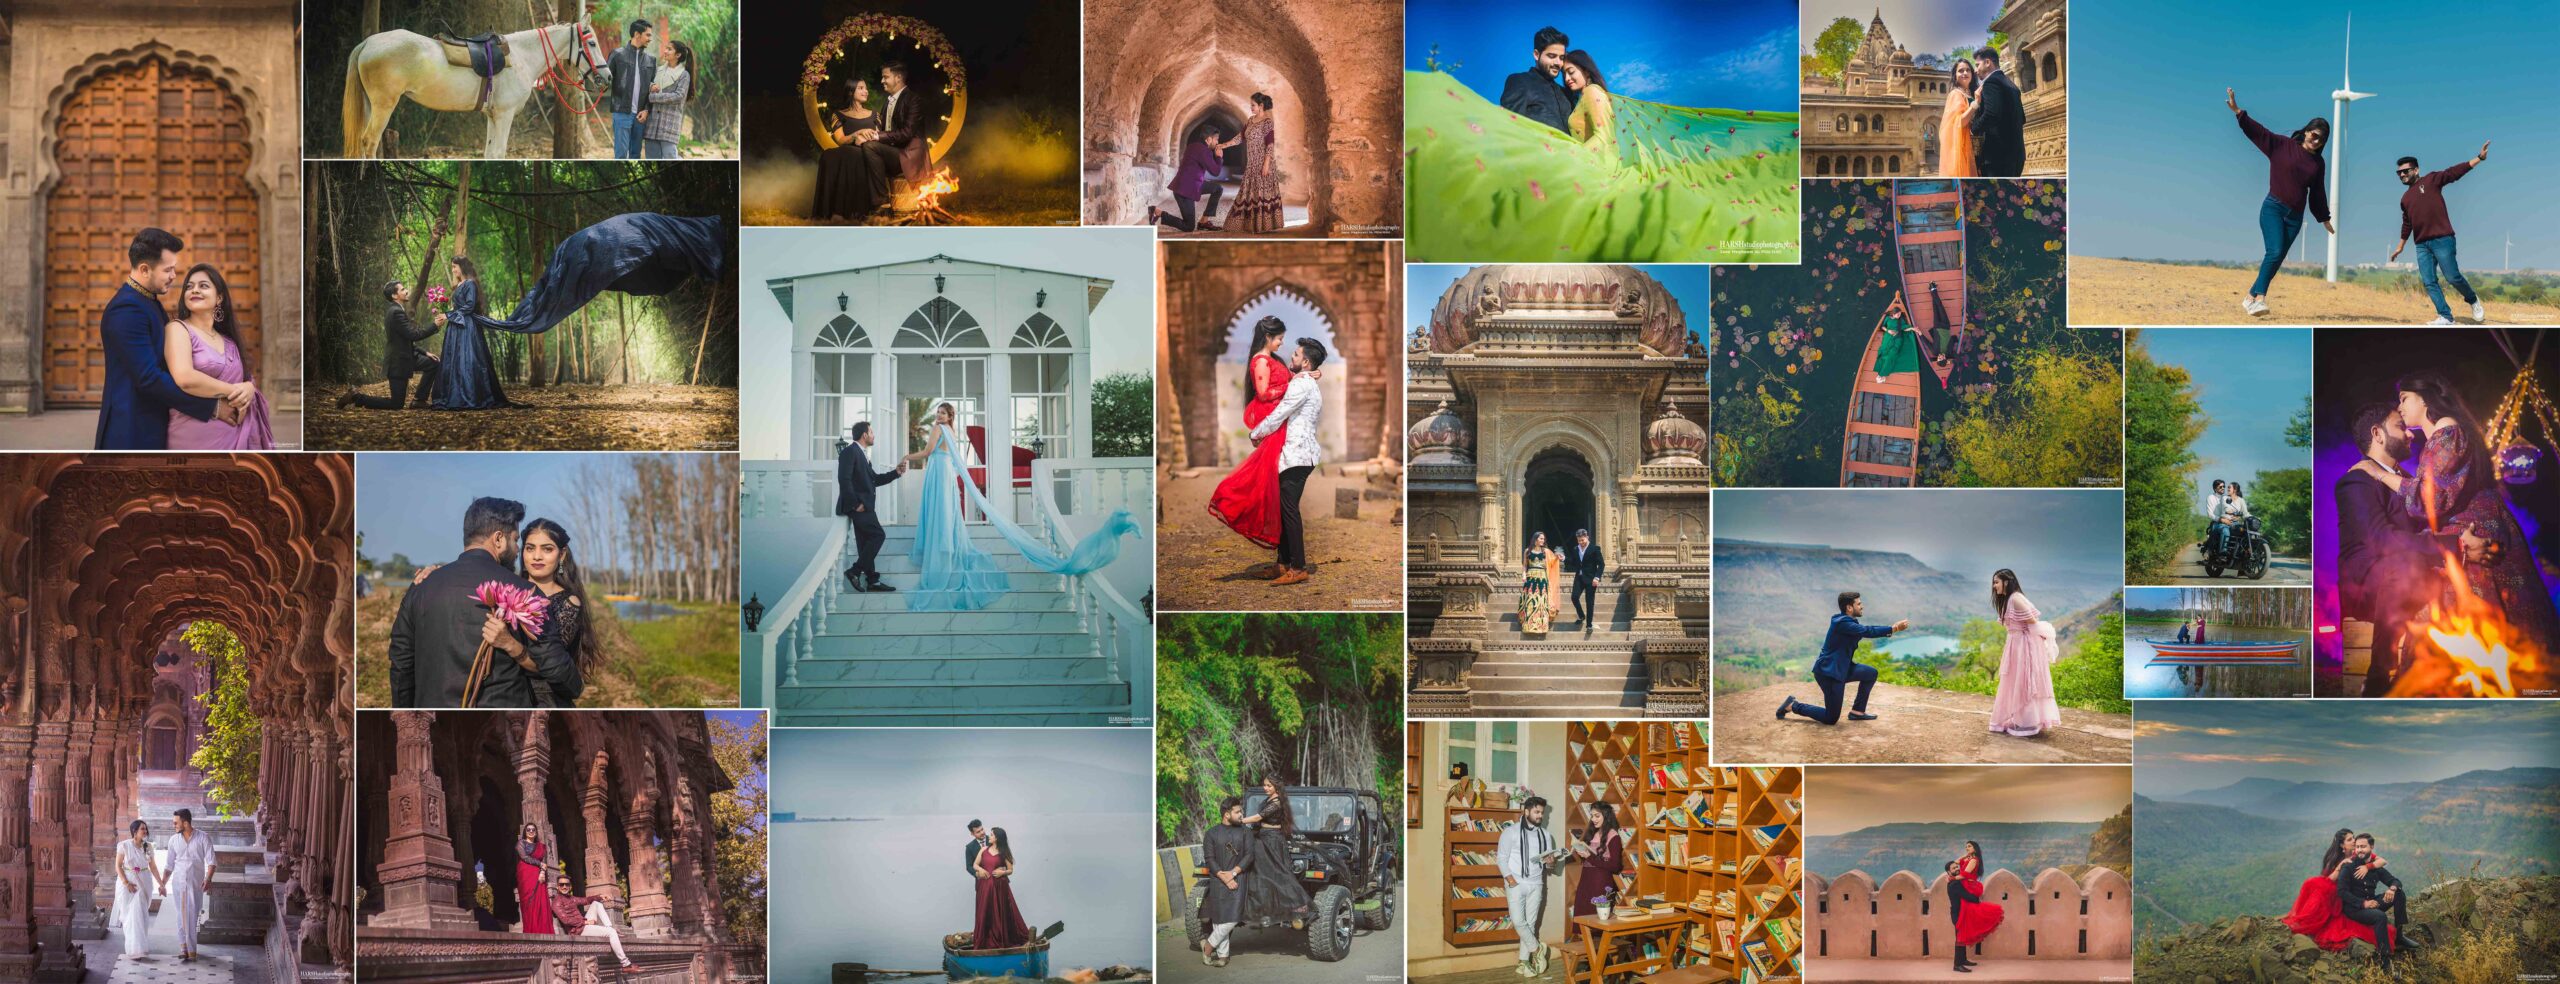 Pre-wedding shoot featuring couples at the best pre wedding shoot locations in Indore: Lotus Valley, Mandu, Rajwada Palace, Krishnapura Chhatri, Maheshwar, and Wildmit. Explore stunning pre-wedding photography spots in Indore for an unforgettable experience.Capture the essence of your love story with these best ideas for a couples' shoot at this stunning location. From romantic strolls along scenic pathways to intimate moments amidst historic ruins, let the beauty of the surroundings enhance your photoshoot experience. Experiment with different poses, lighting, and perspectives to create unforgettable images that reflect your unique bond and the magic of the location.